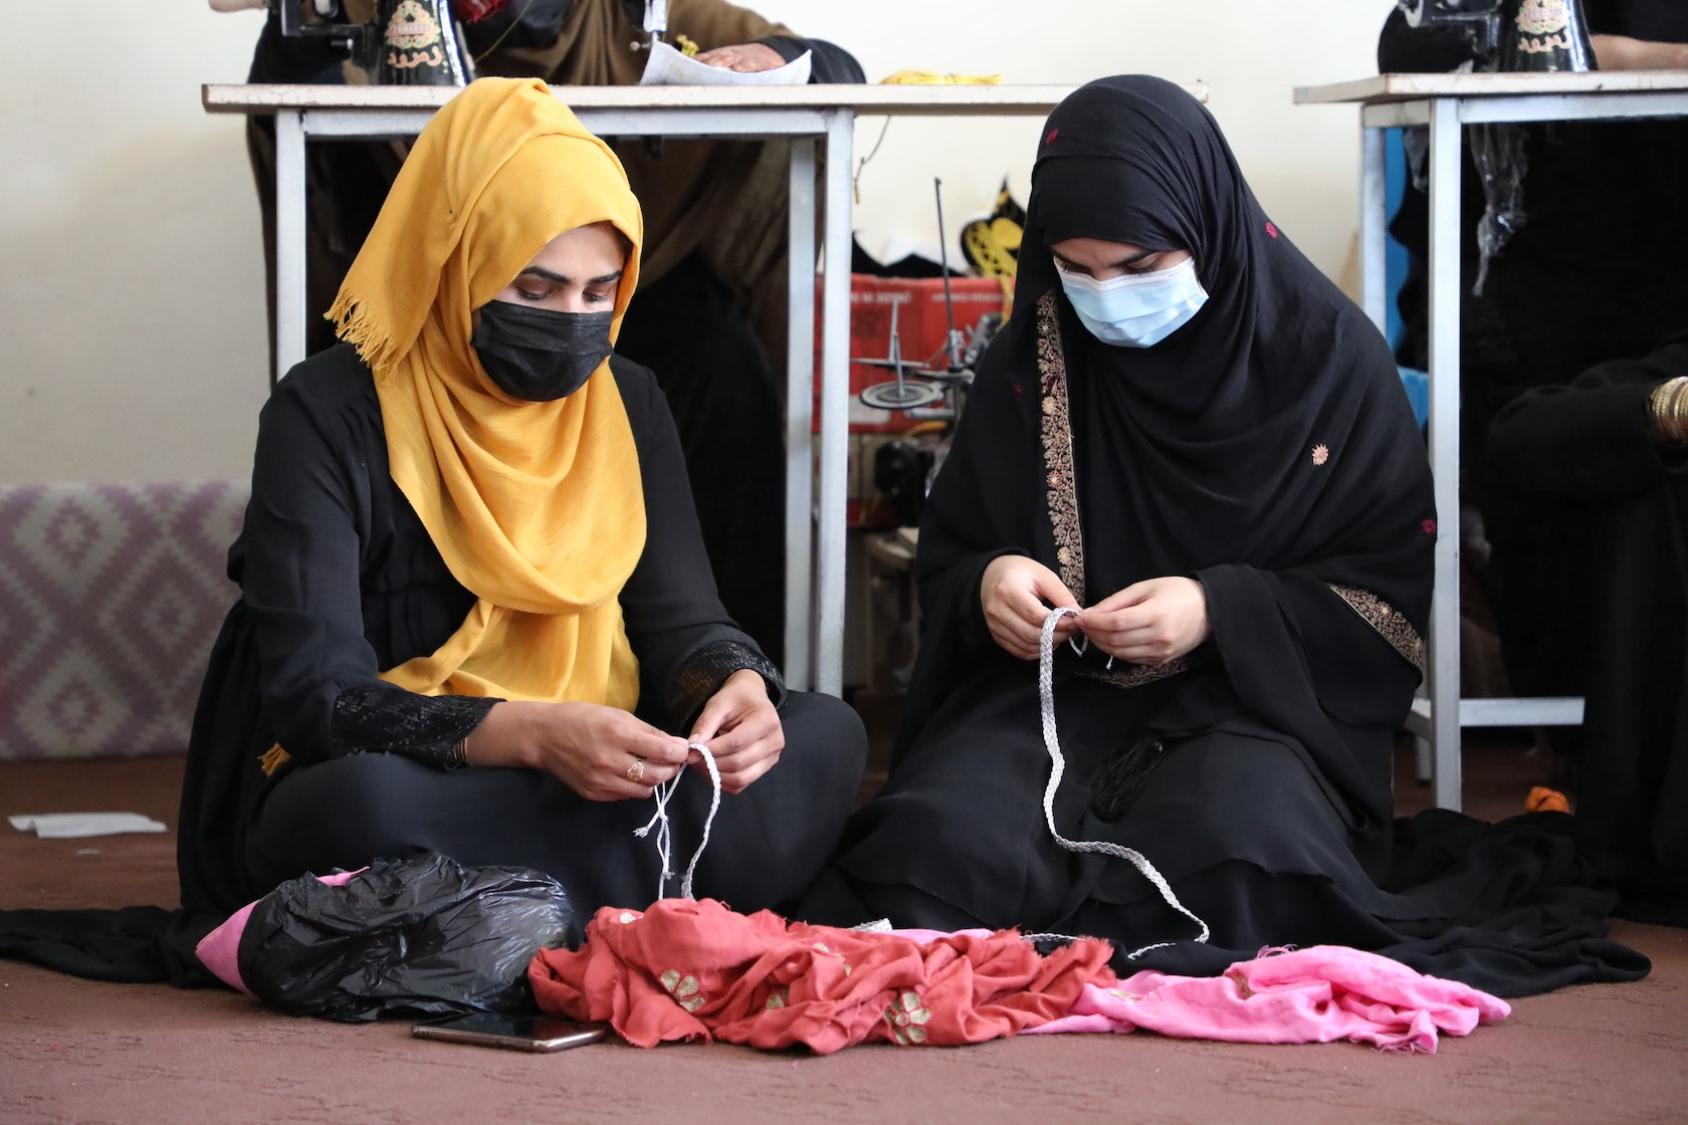 Women engaging in weaving, they are seated on the floor wearing masks and their heads are covered